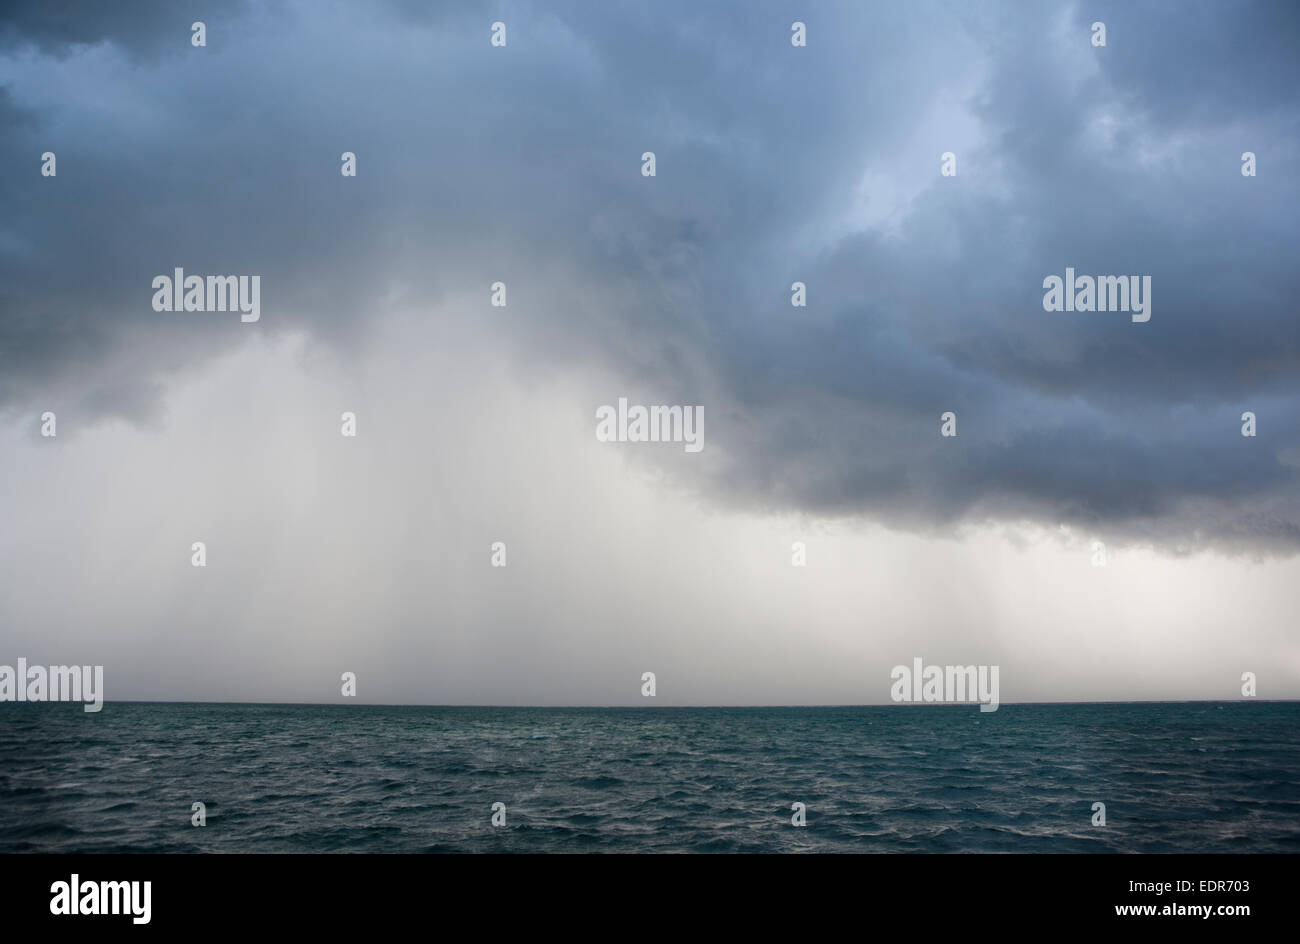 a view of an ocean storm with menacing clouds and rain showering below Stock Photo